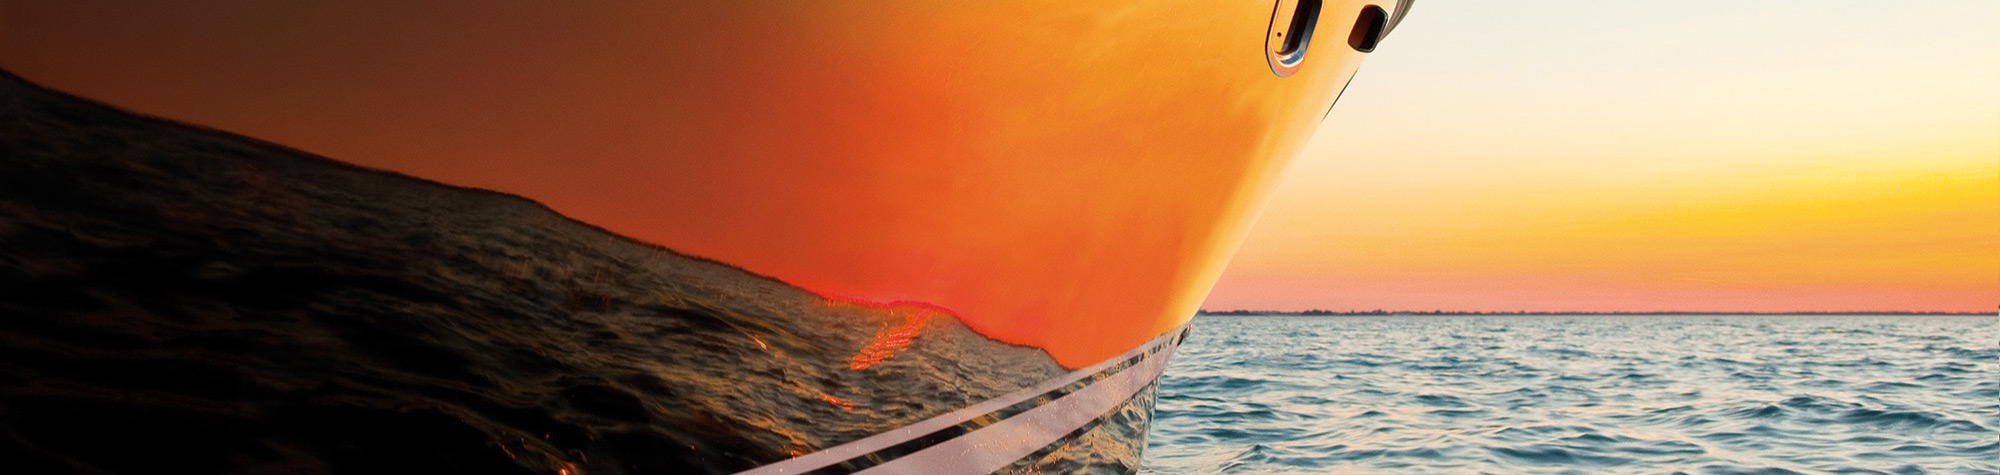 A bright orange sunset, reflected in the hull of a motorboat